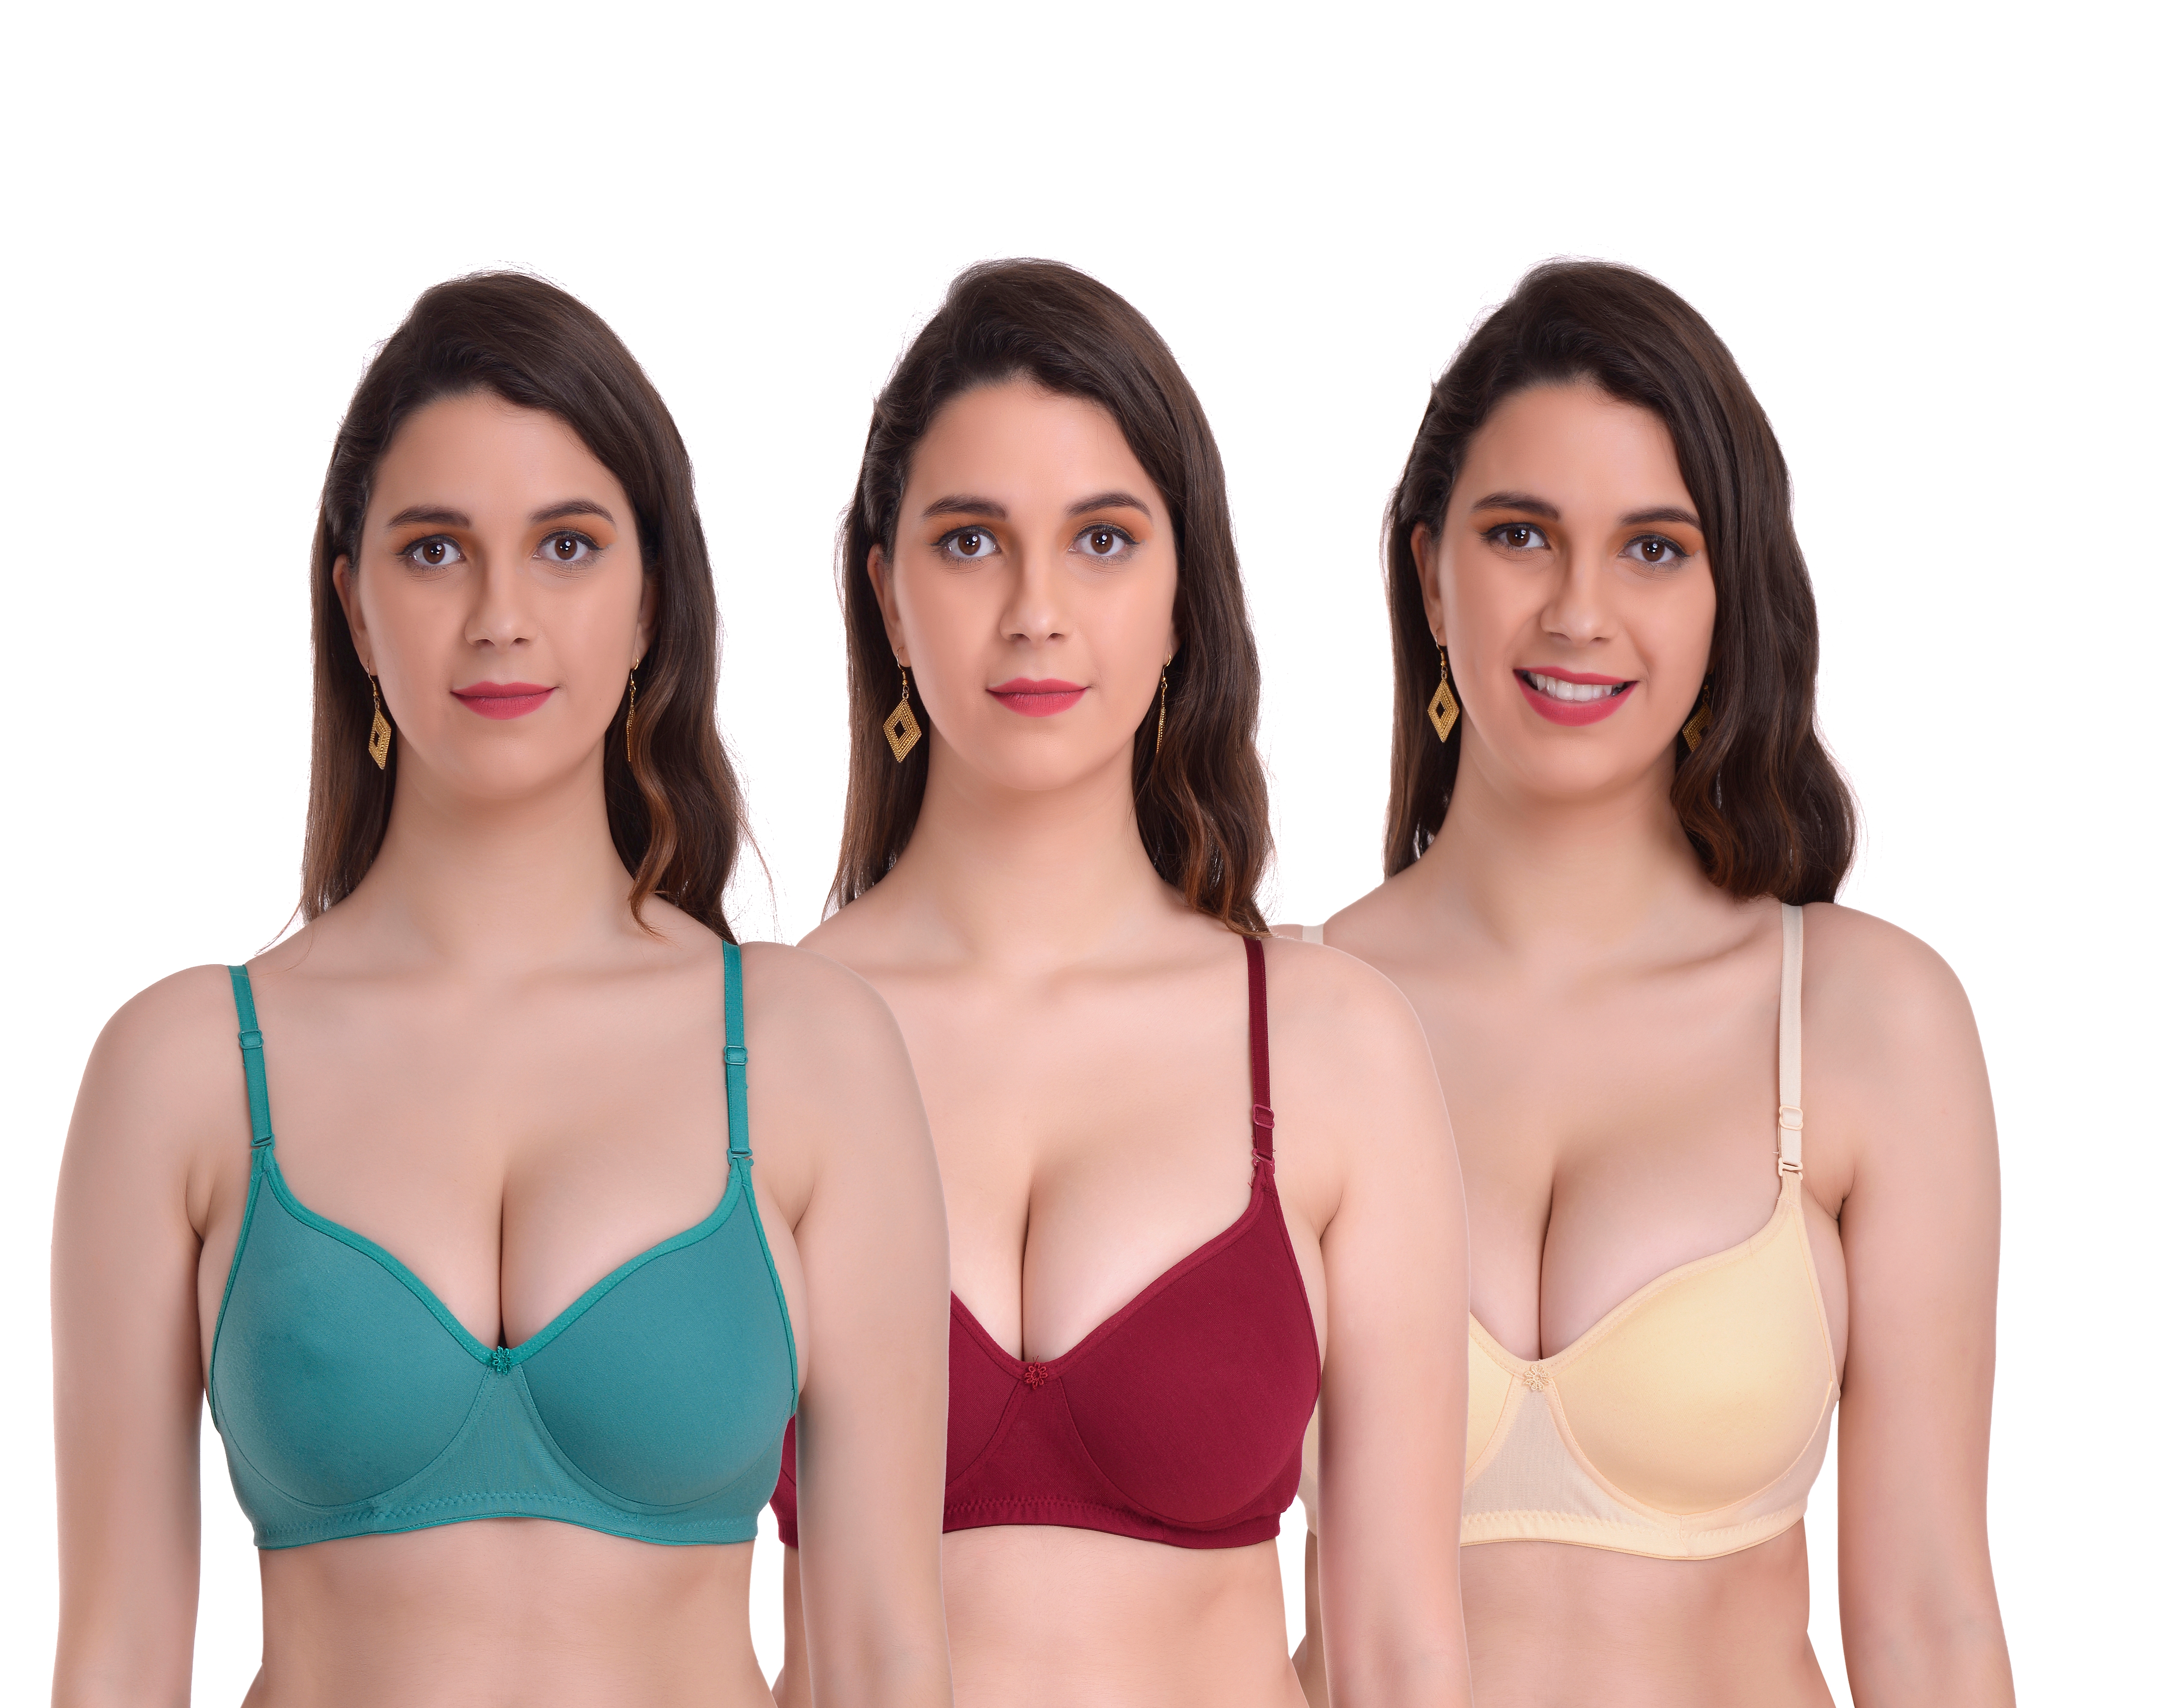 Mynte Women's Cotton Rich Lightly Padded Non-Wired Full Cup Regular Bra (Pack of 3) (Green/Maroon/Yellow,30) (MY-CPPB-7GMY-30)